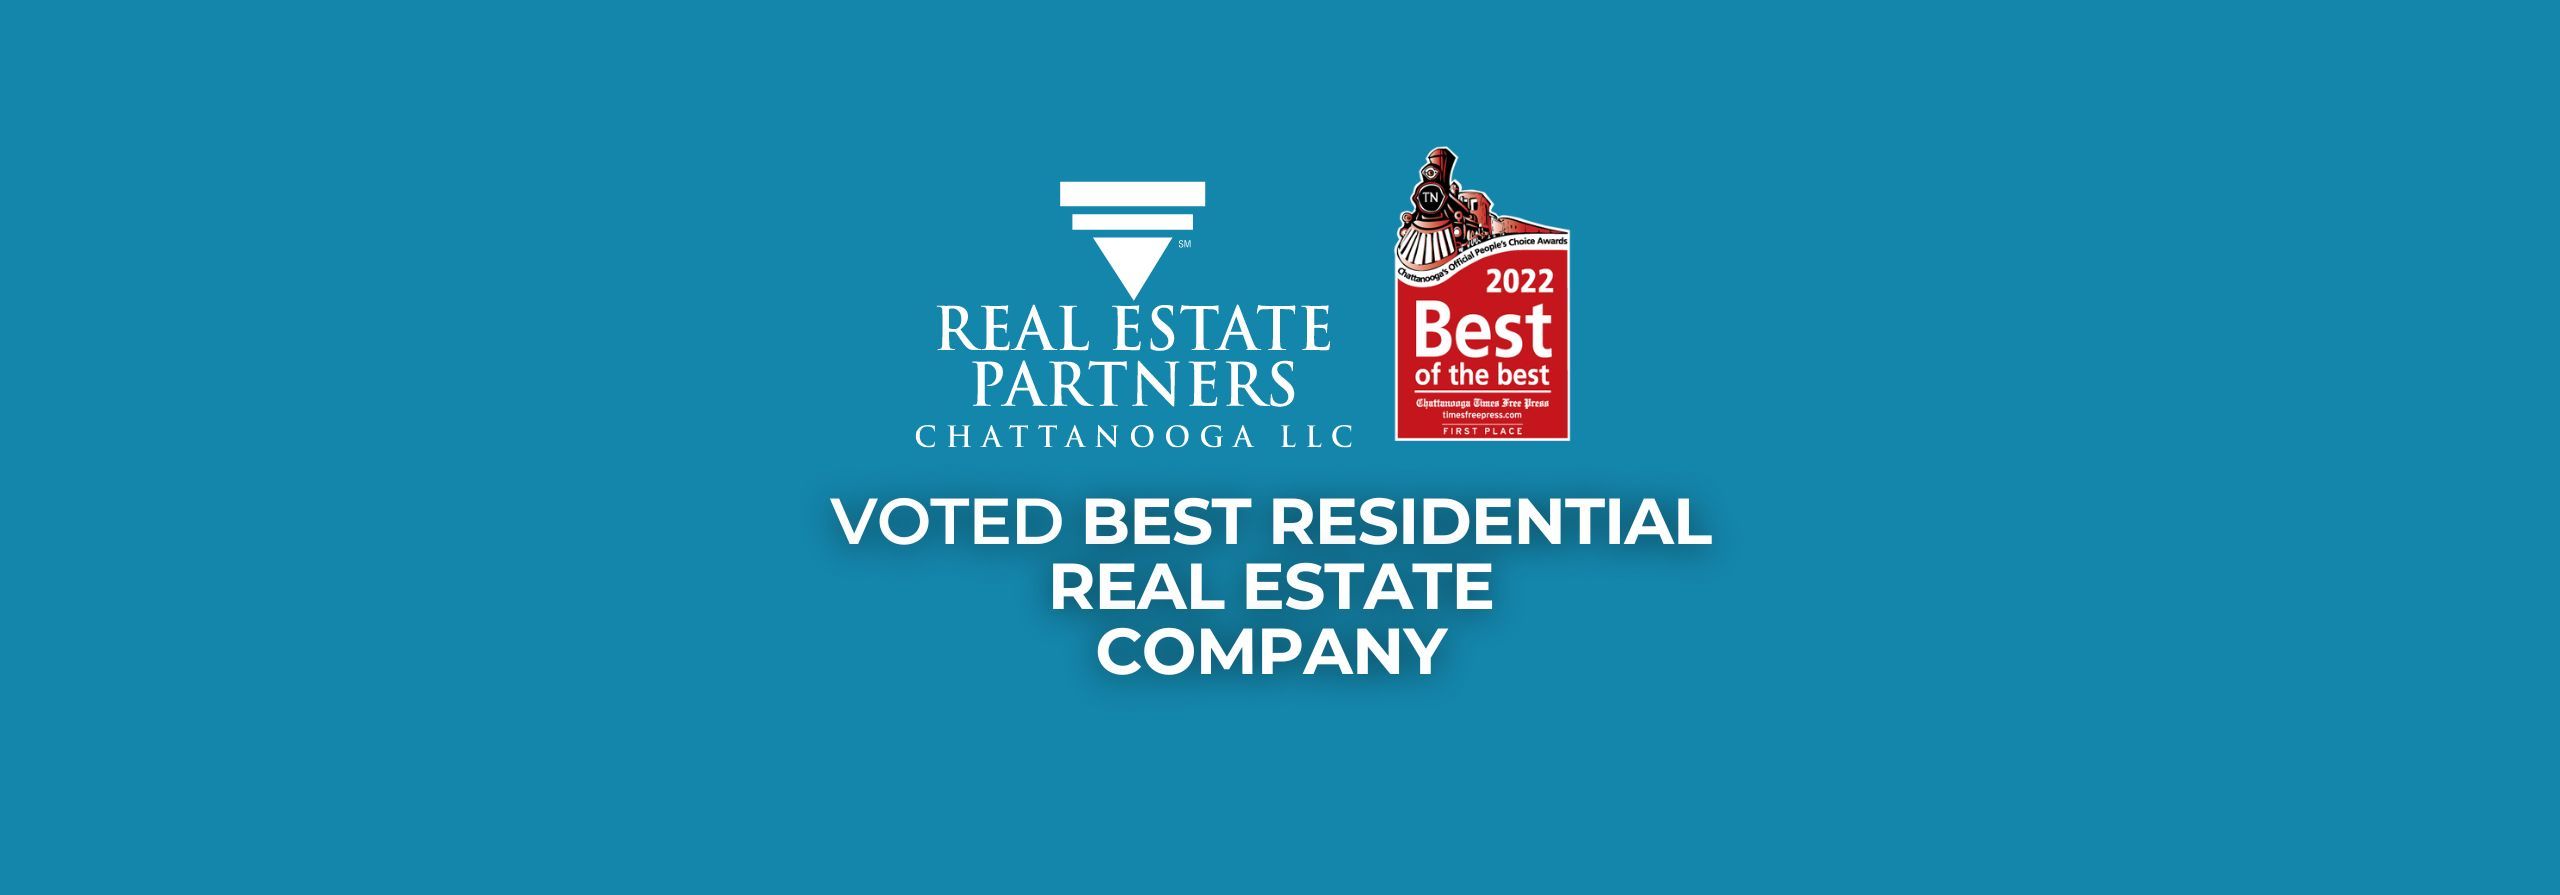 Preview image of Real Estate Partners Chattanooga wins Best Residential Real Estate Company For Second Year